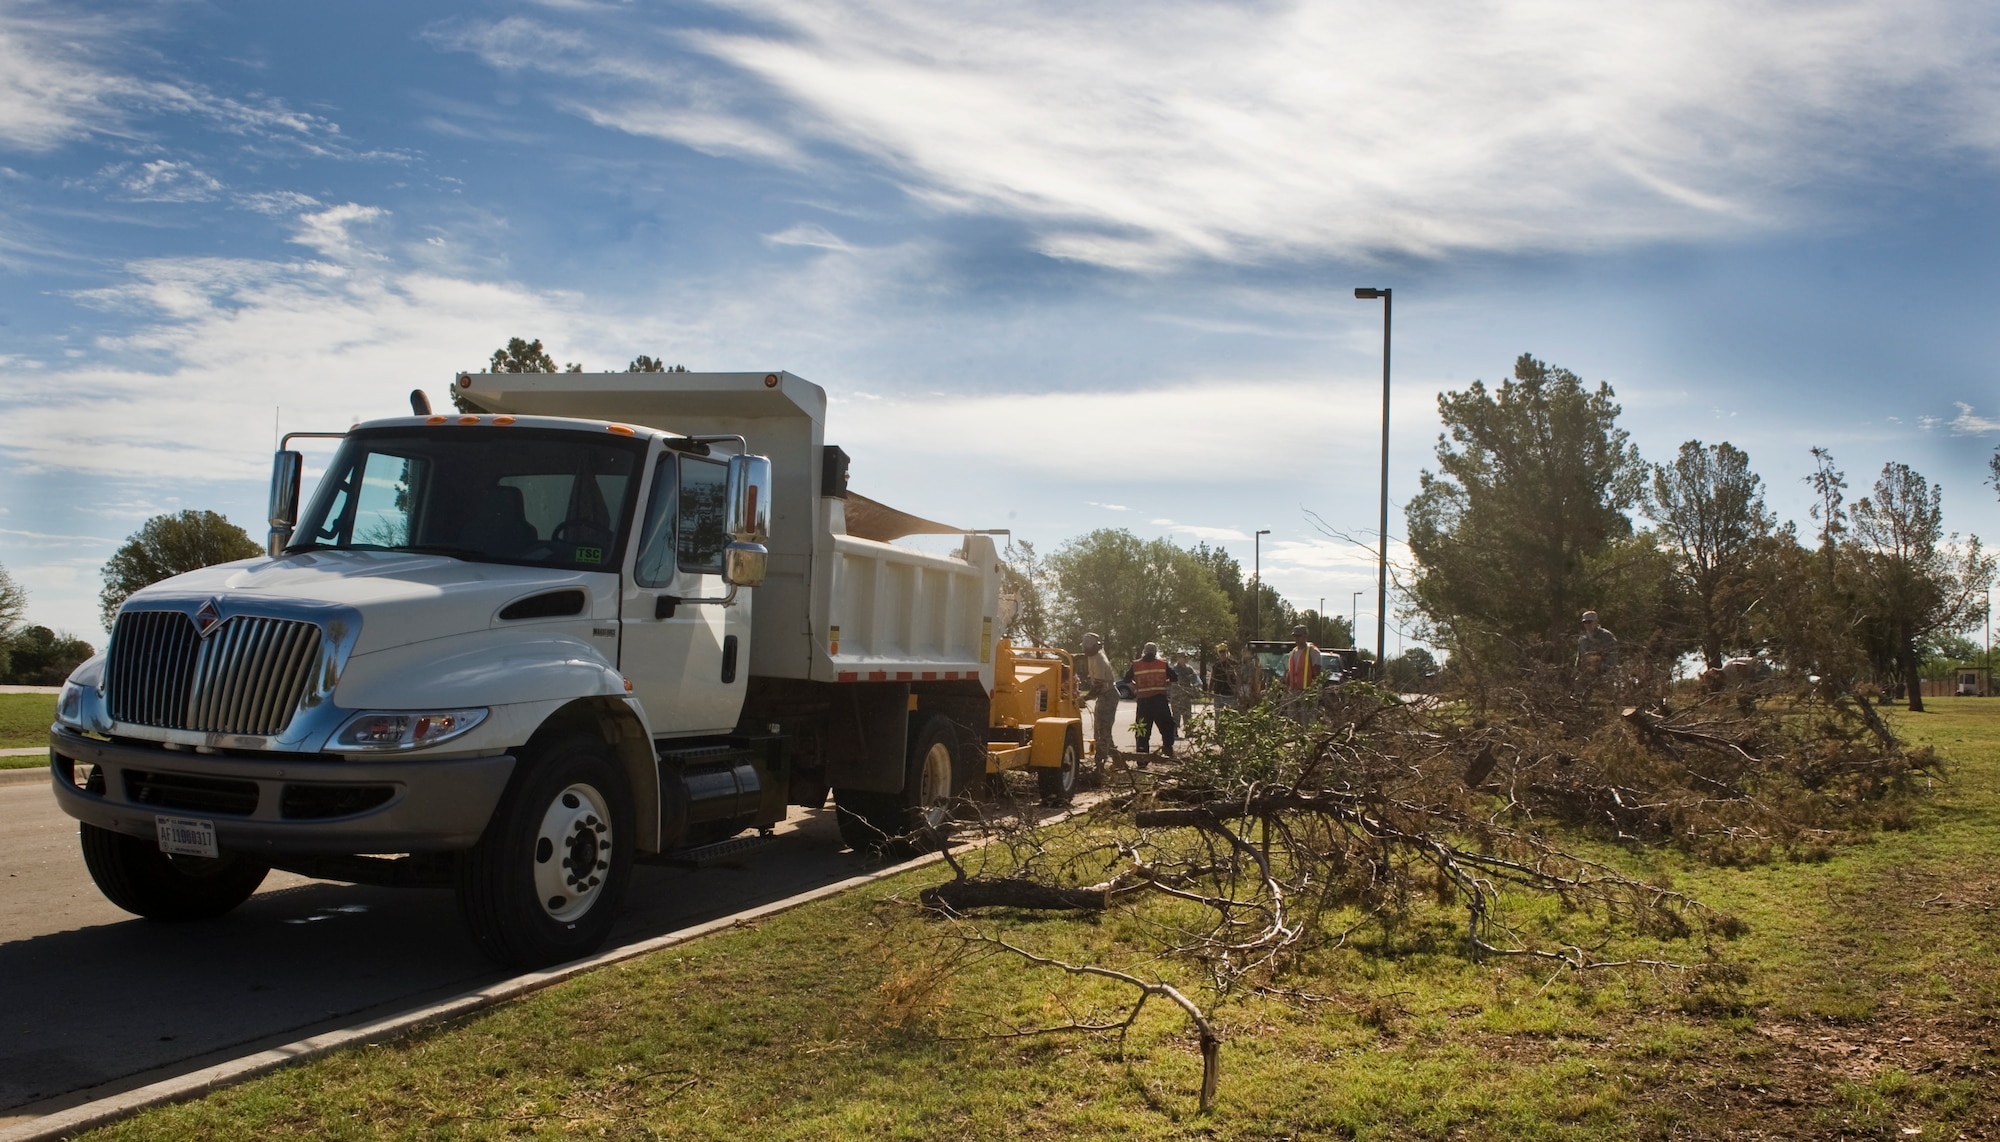 U.S. Air Force Airmen with the 7th Civil Engineer Squadron (CES) clean up tree debris June 18, 2013, at Dyess Air Force Base, Texas. The 7th CES pavements and equipment shop collected 65-tons of debris after a storm hit on June 17. (U.S. Air Force photo by Senior Airman Jonathan Stefanko/Released)